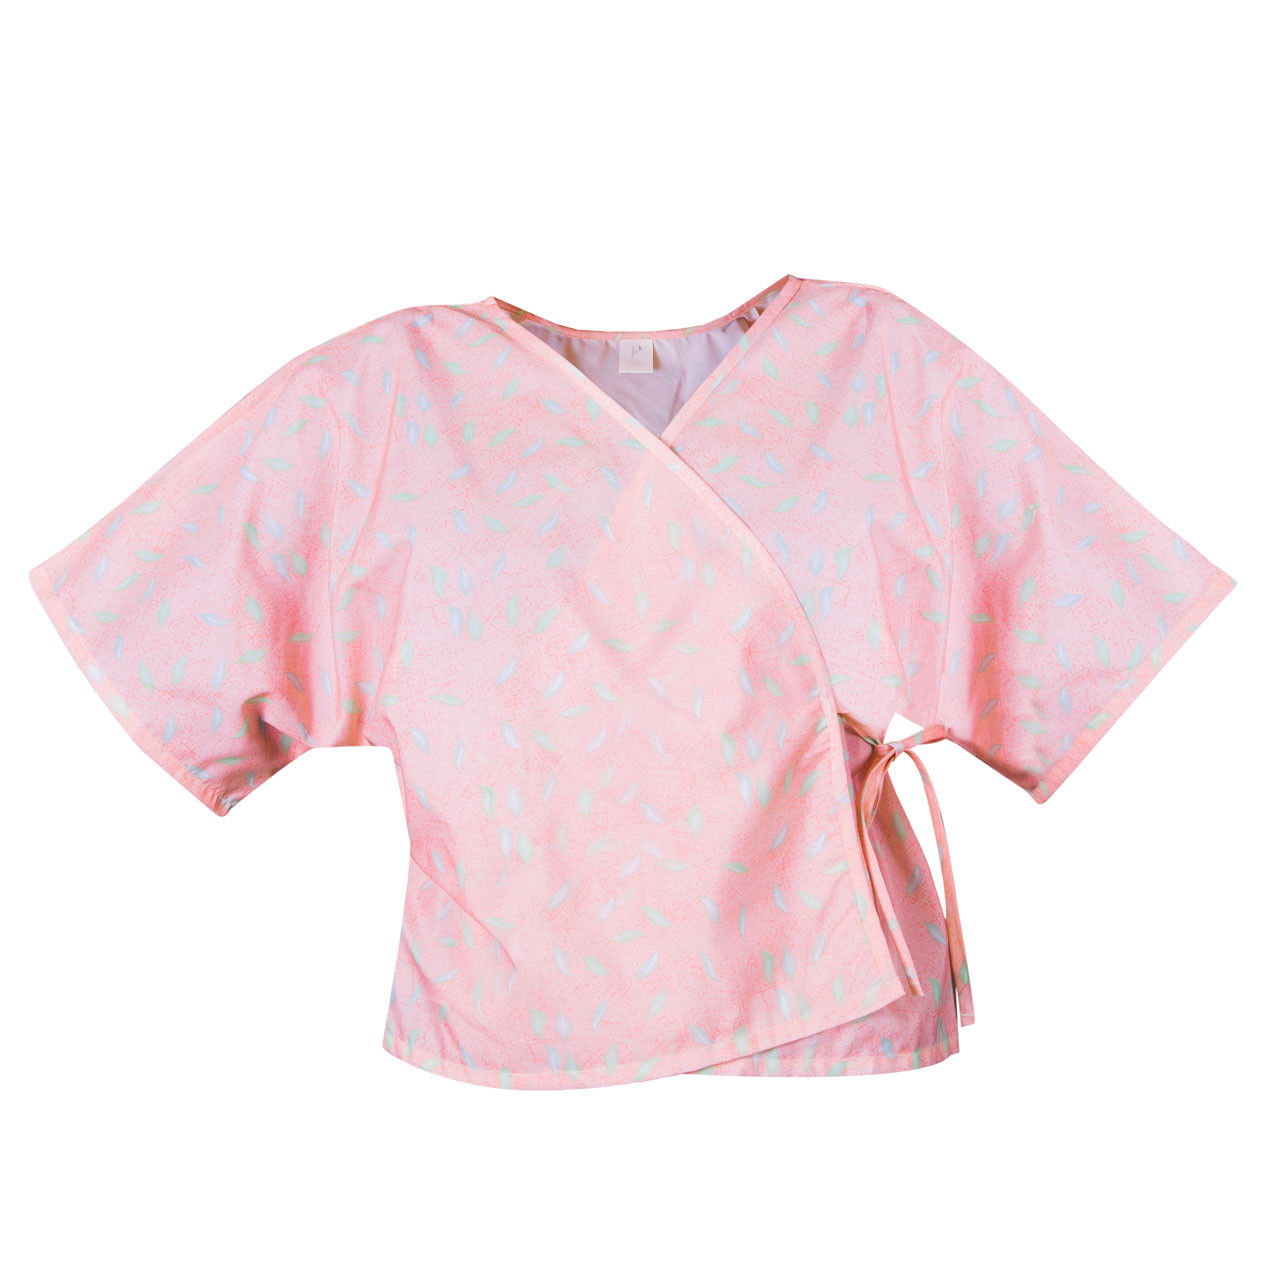 What are the fitting sizes for standard mammography capes by American Dawn?